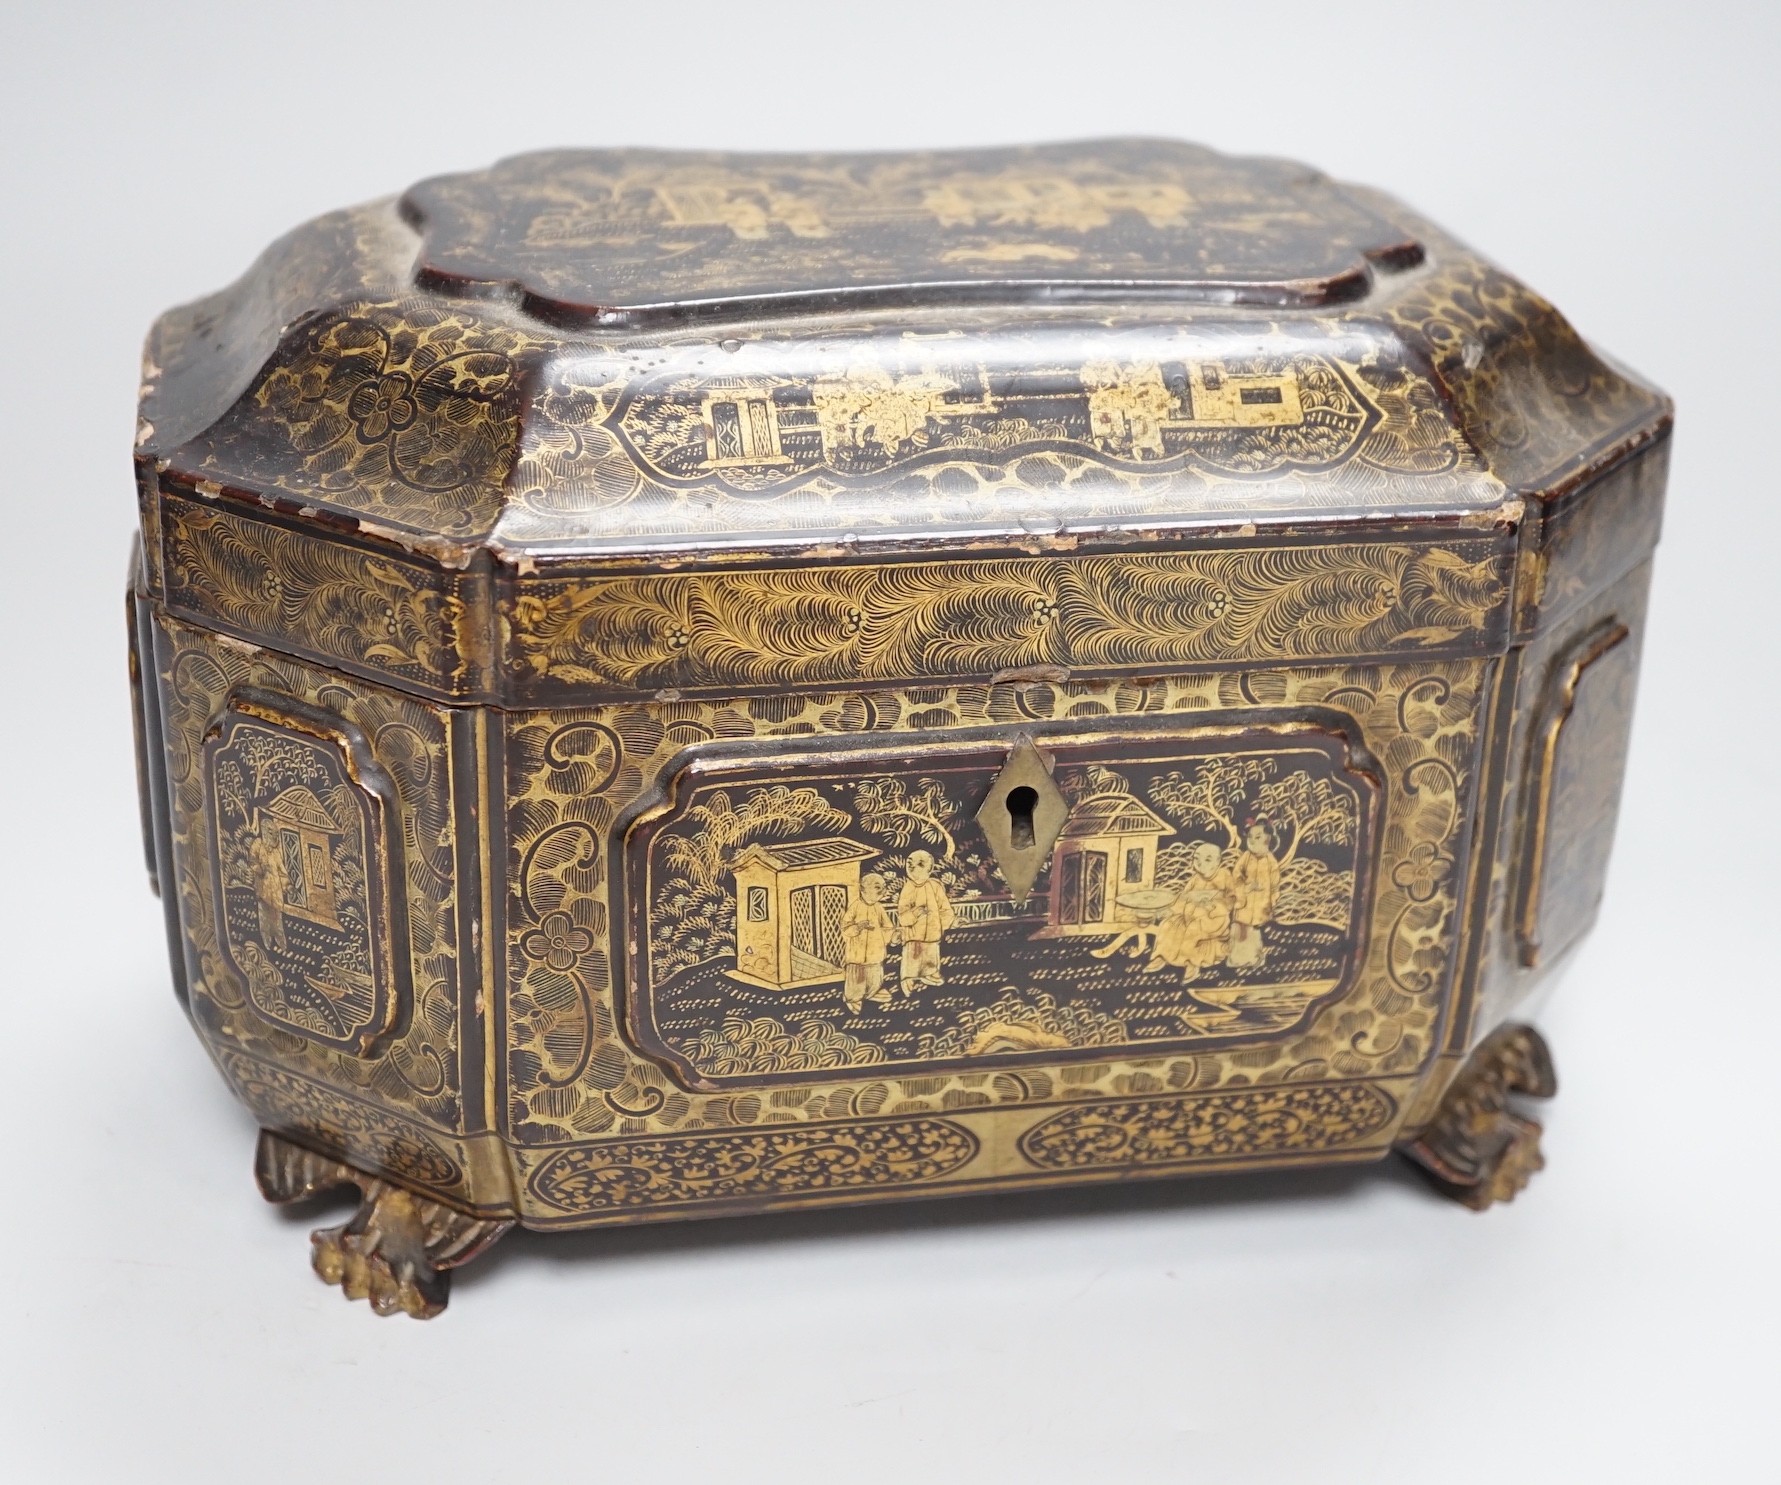 A 19th century Chinese chinoiserie lacquered sarcophagus form tea caddy, pewter lined interior with bone handles, 23cm